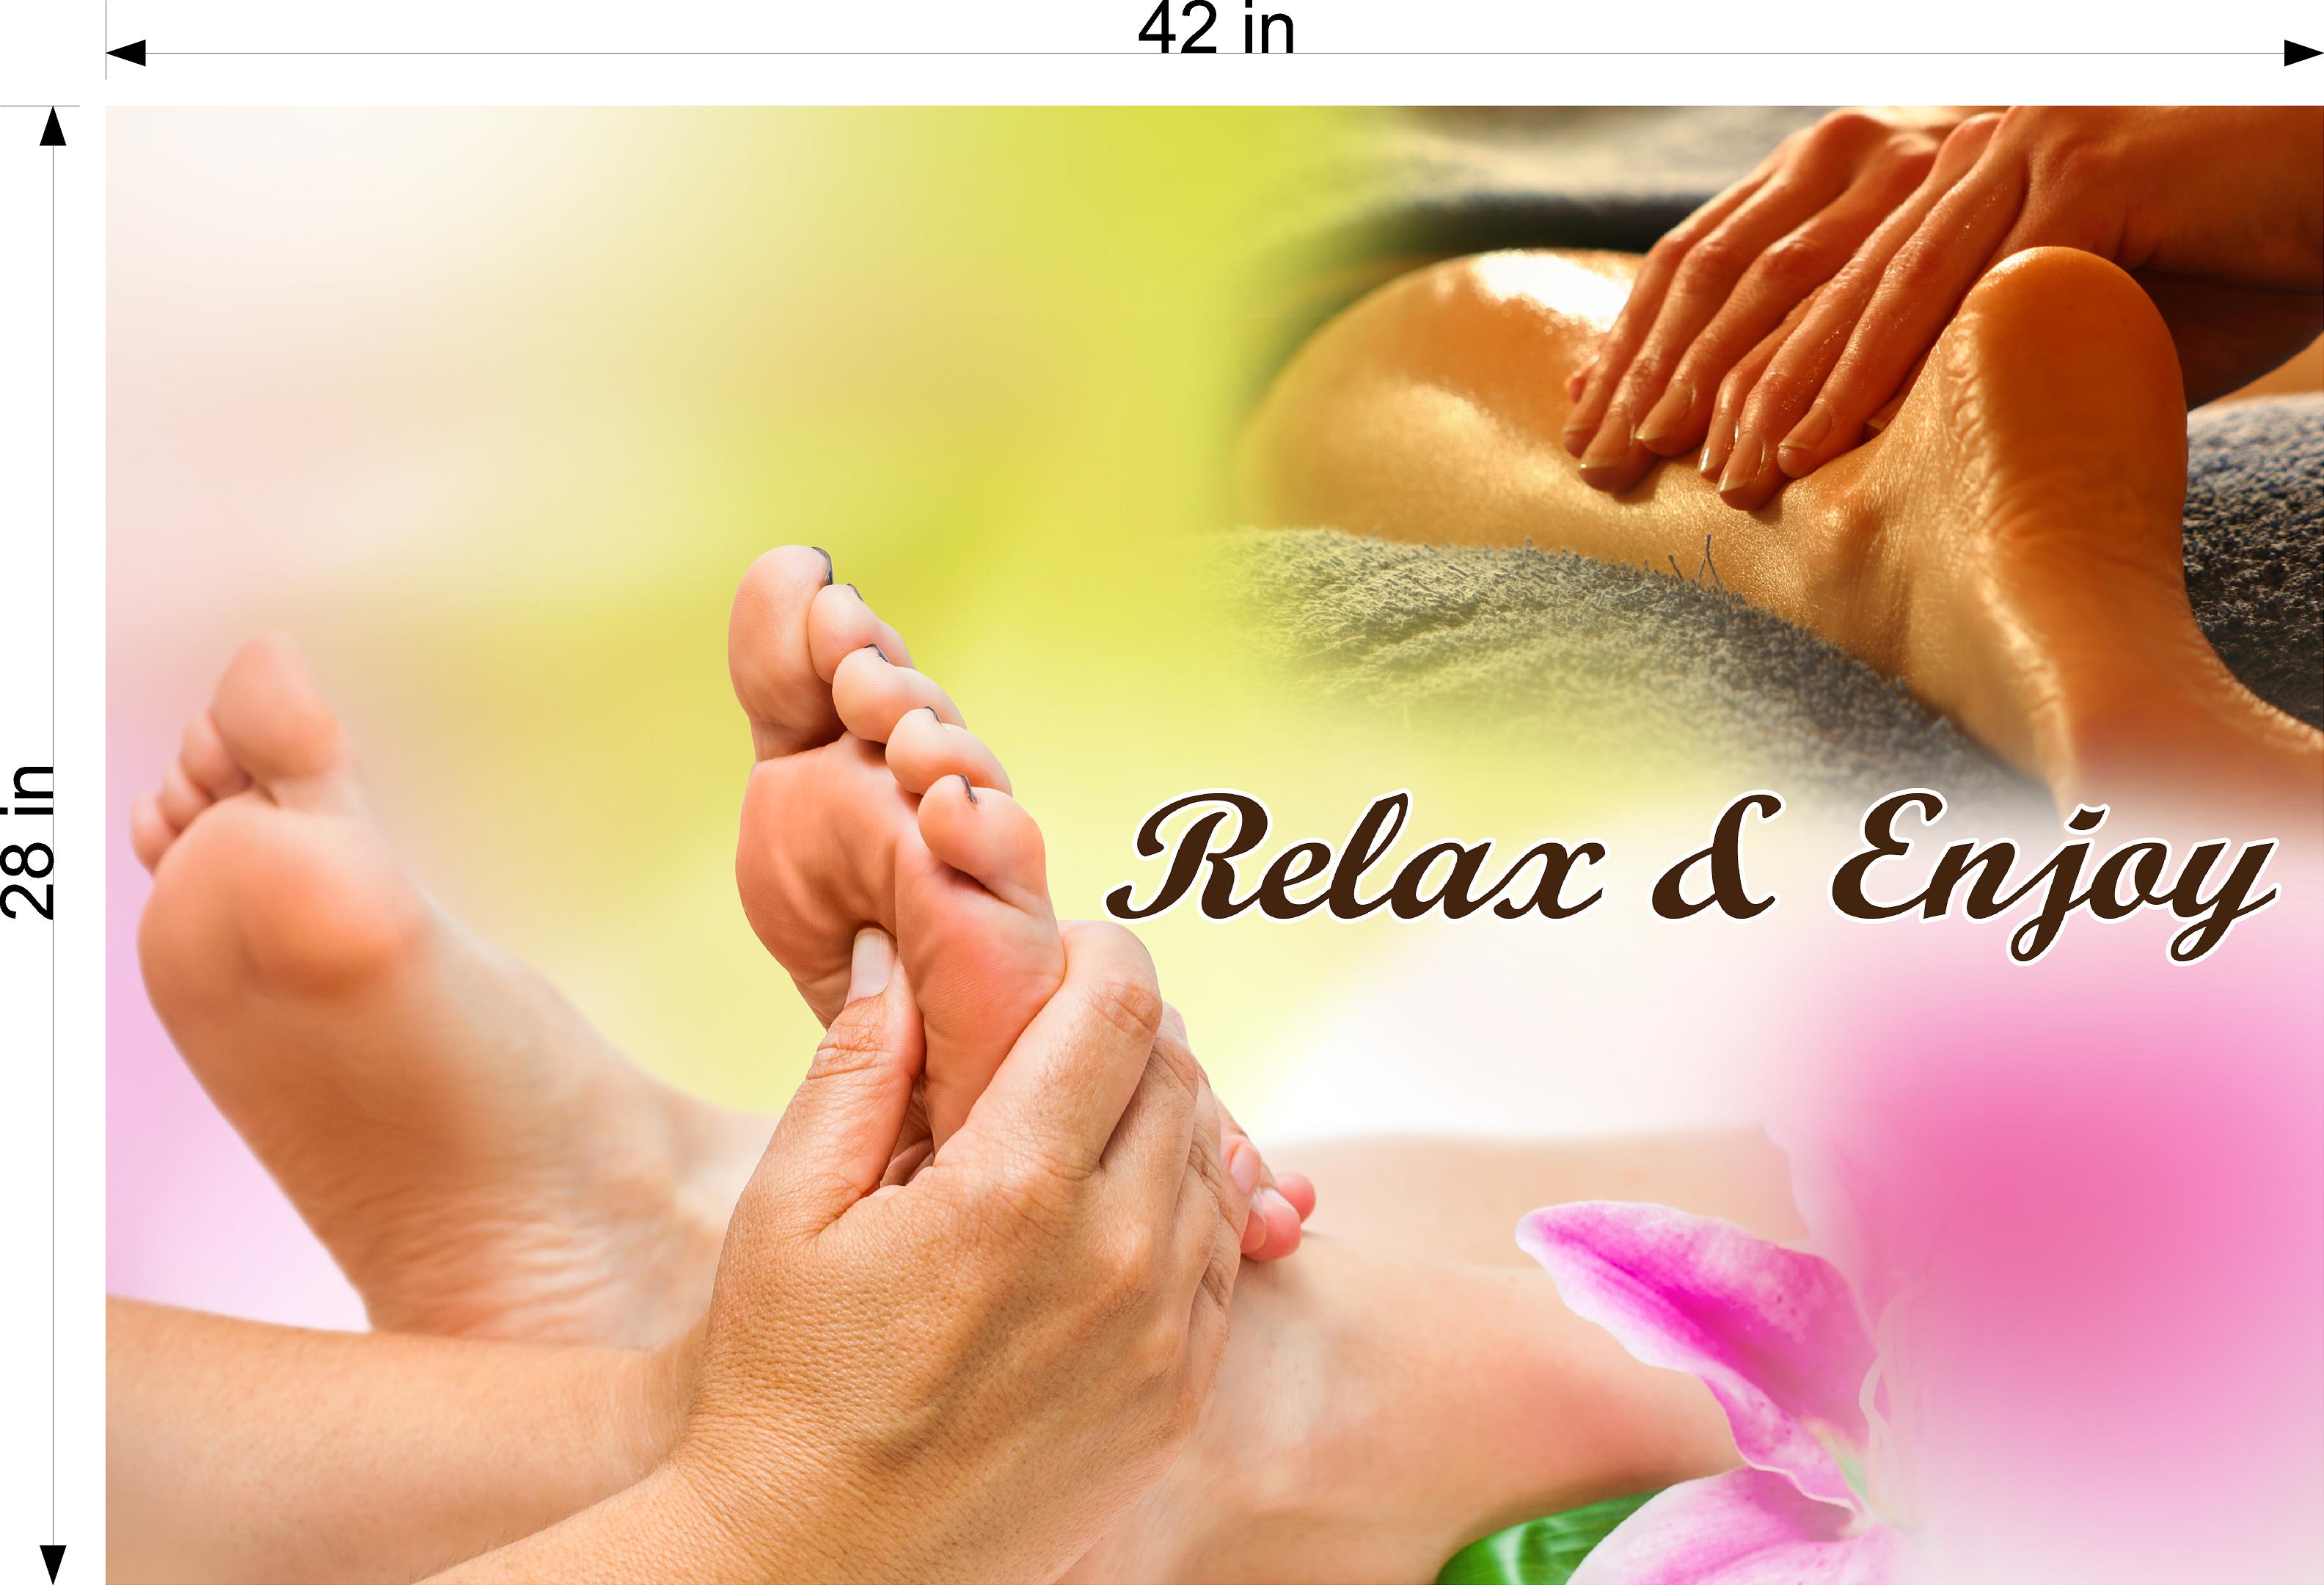 Massage 19 Photo-Realistic Paper Poster Interior Inside Wall Window Non-Laminated Sign Therapy Back Body Foot Horizontal